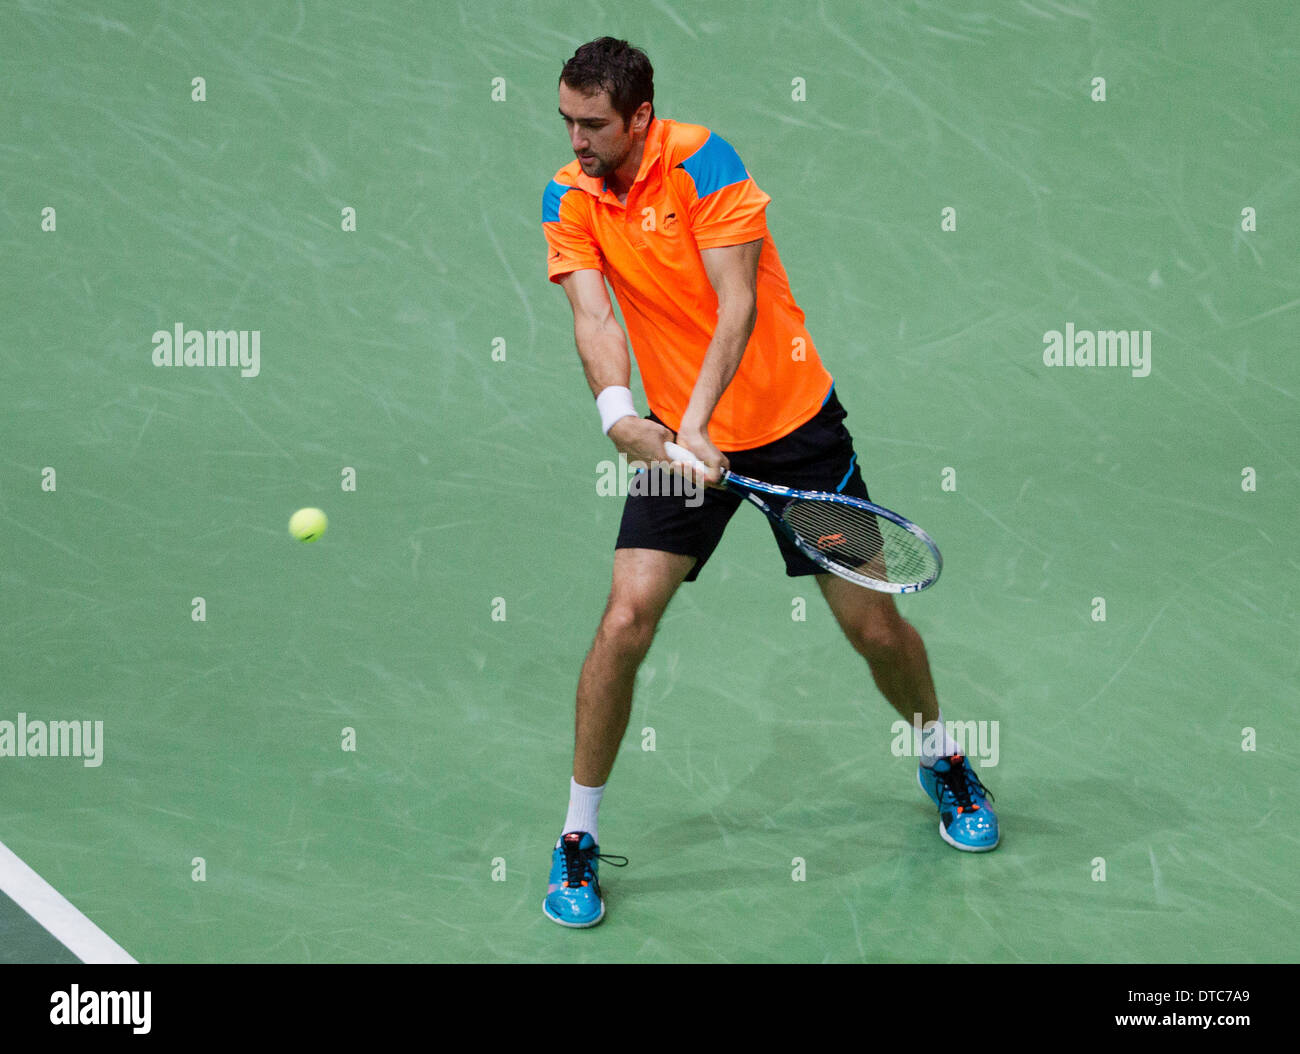 Rotterdam, The Netherlands. 14th Feb, 2014. ABN AMRO World Tennis Tournament  Marin Cilic(KRO) in his match against Andy Murray(GRB)  Photo:Tennisimages/Henk Koster/Alamy Live News Stock Photo - Alamy